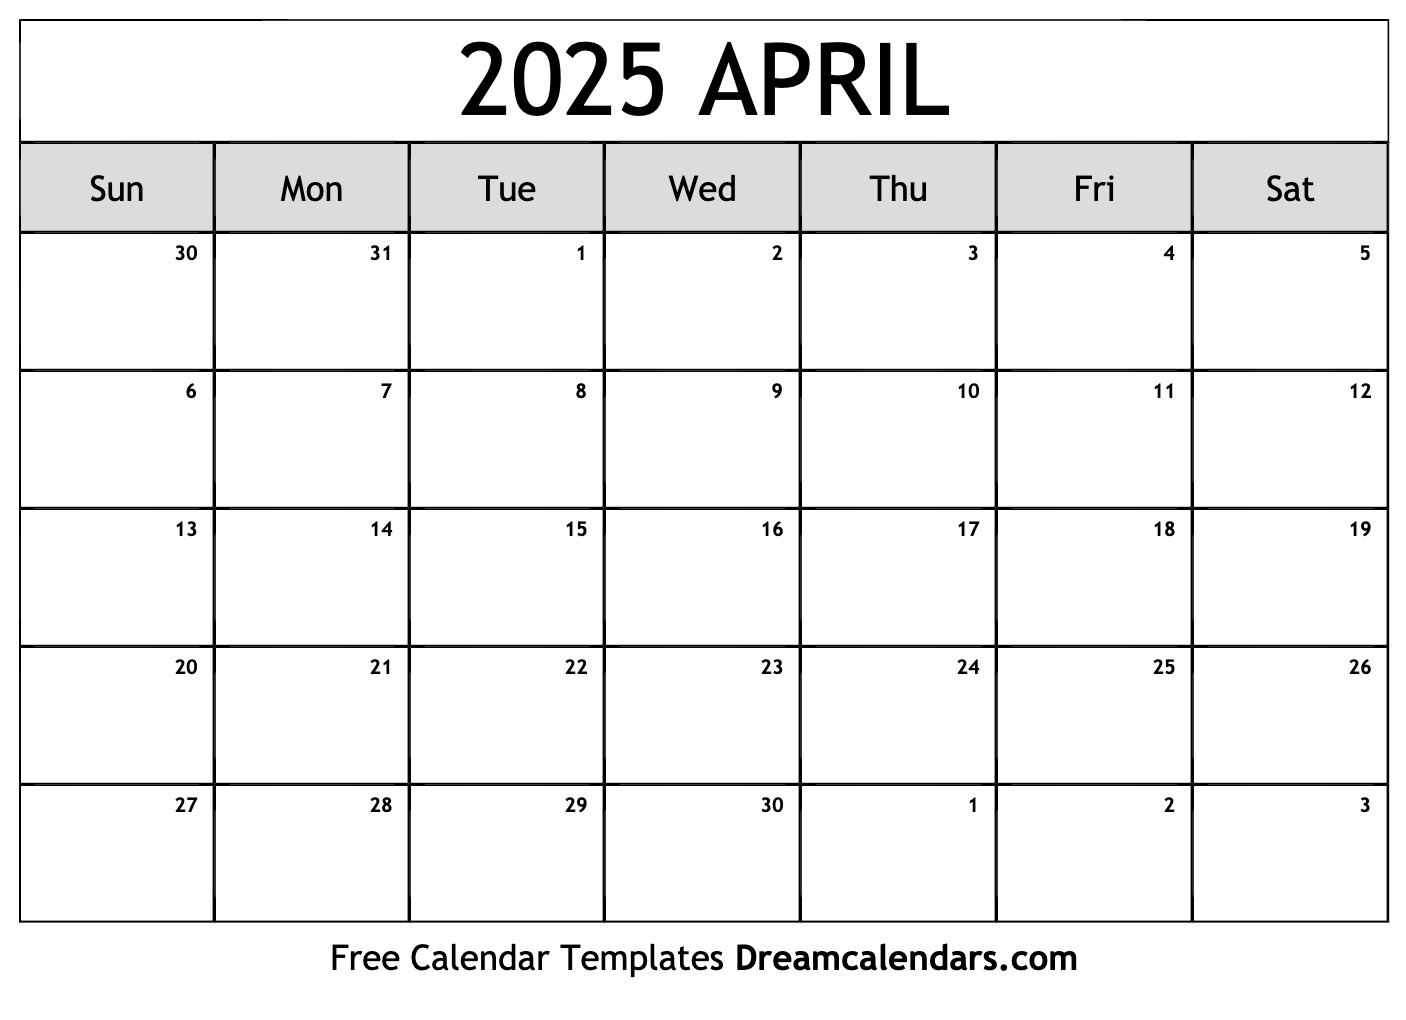 April 2025 Calendar Free Printable with Holidays and Observances